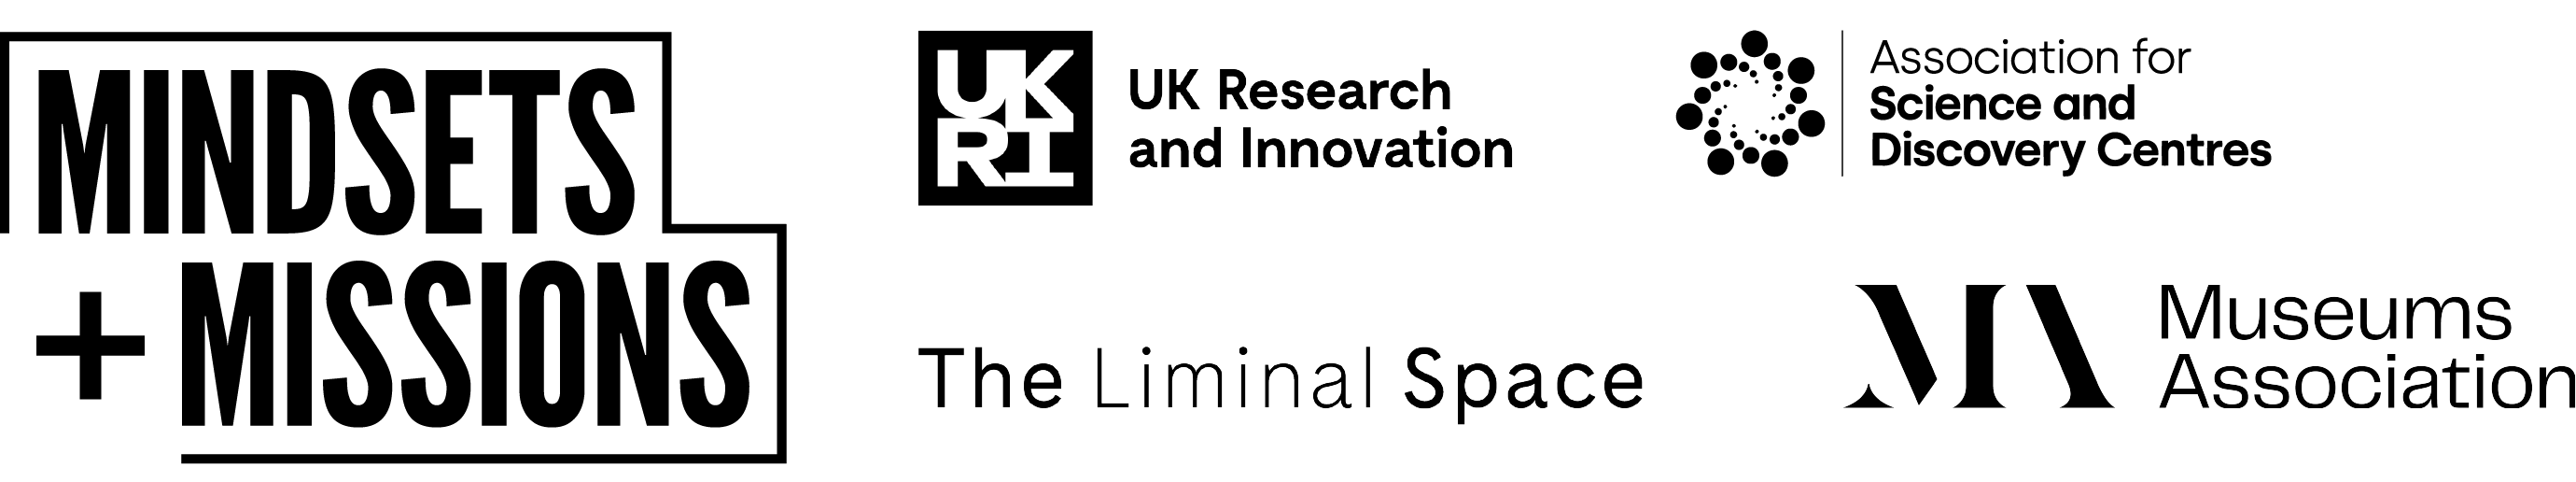 Logos of Mindsets and Missions, Association for Science and Discovery Centres, UK Research and Innovation, The Liminal Space, Museums Association